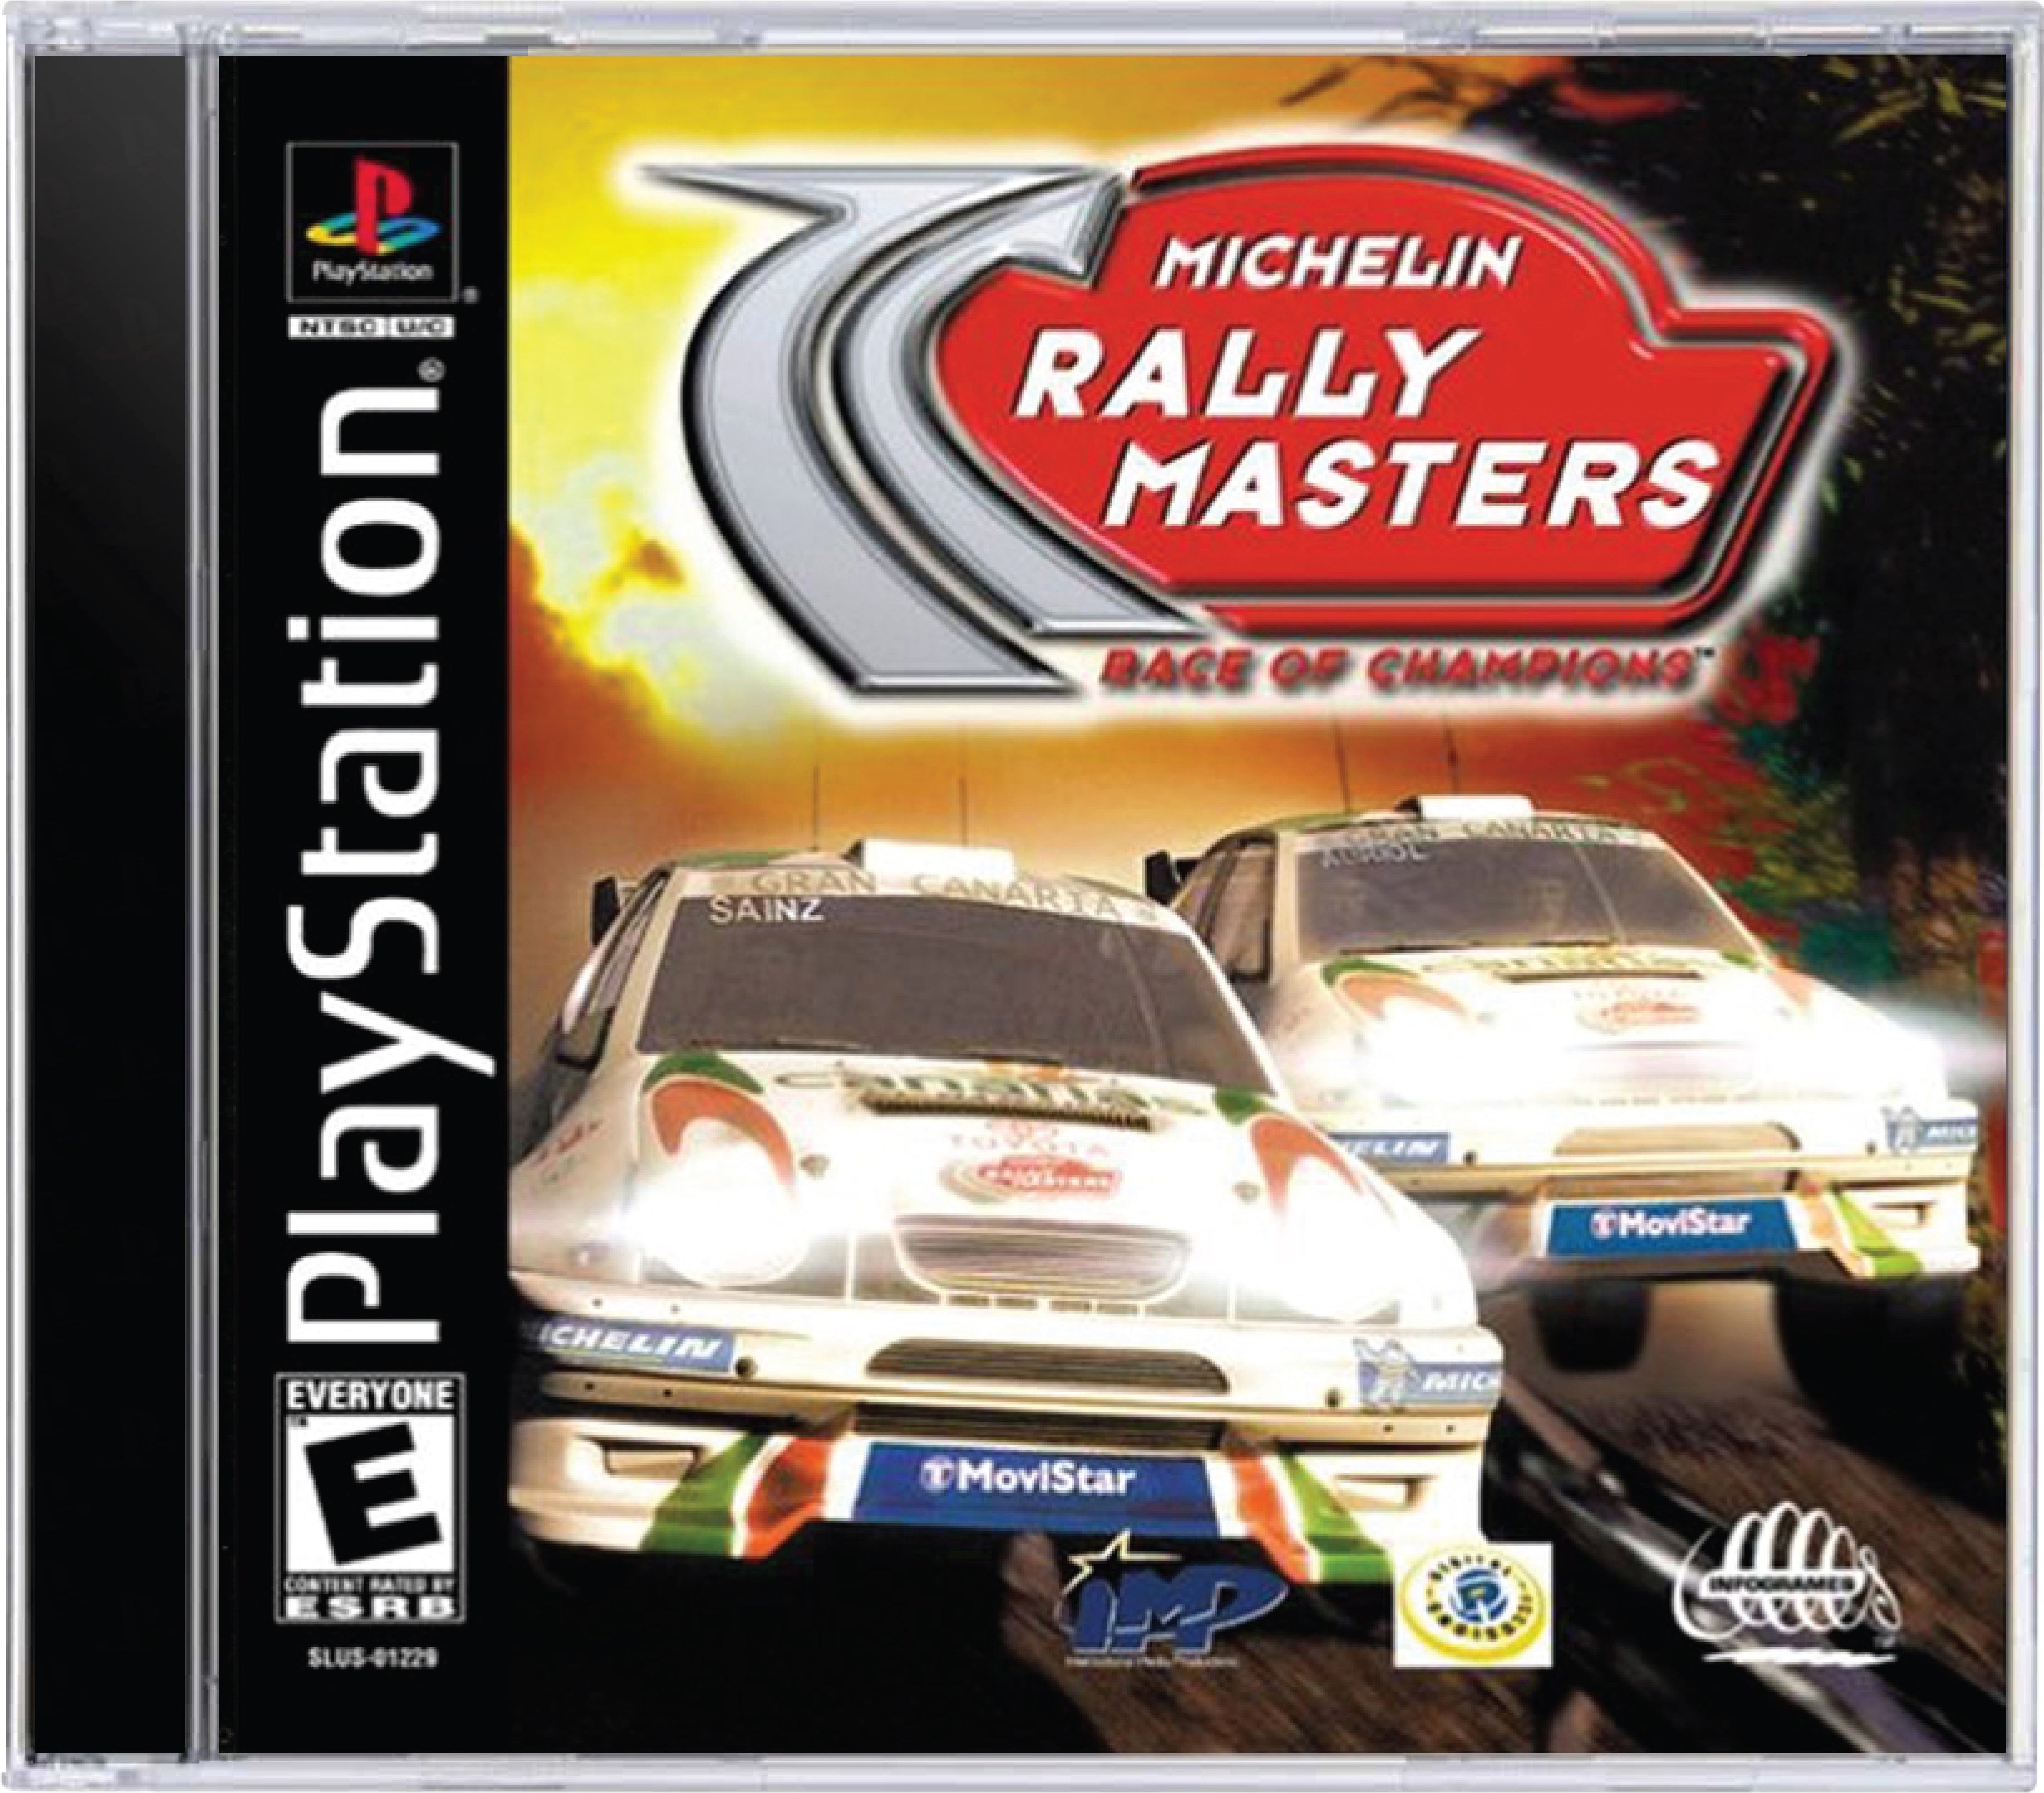 Michelin Rally Masters Race of Champions Cover Art and Product Photo